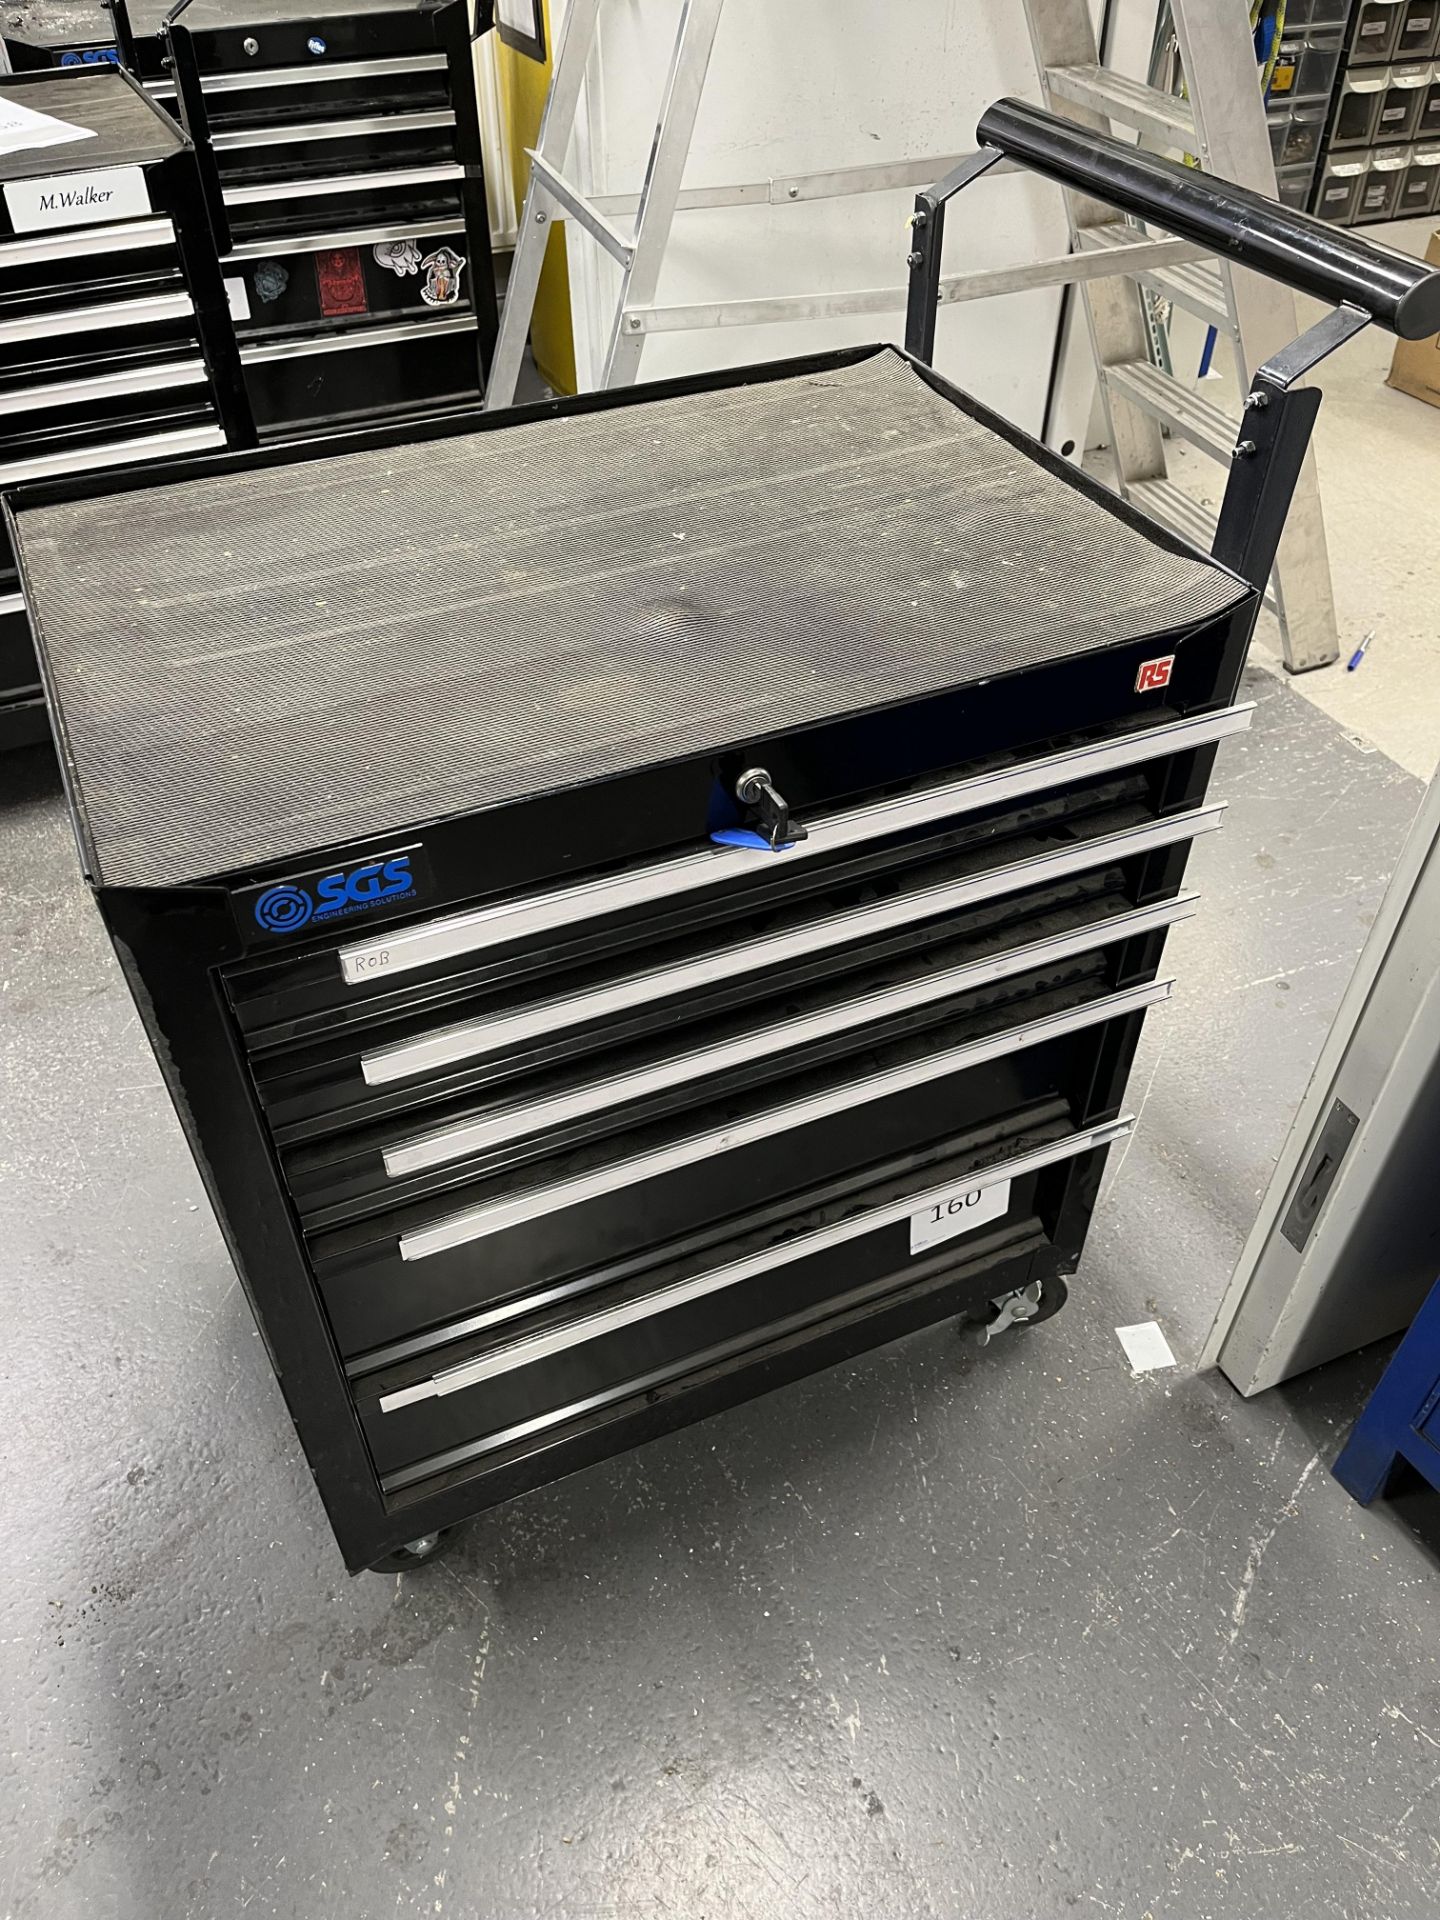 1, SGS Solutions mobile tool chest, 5 drawers